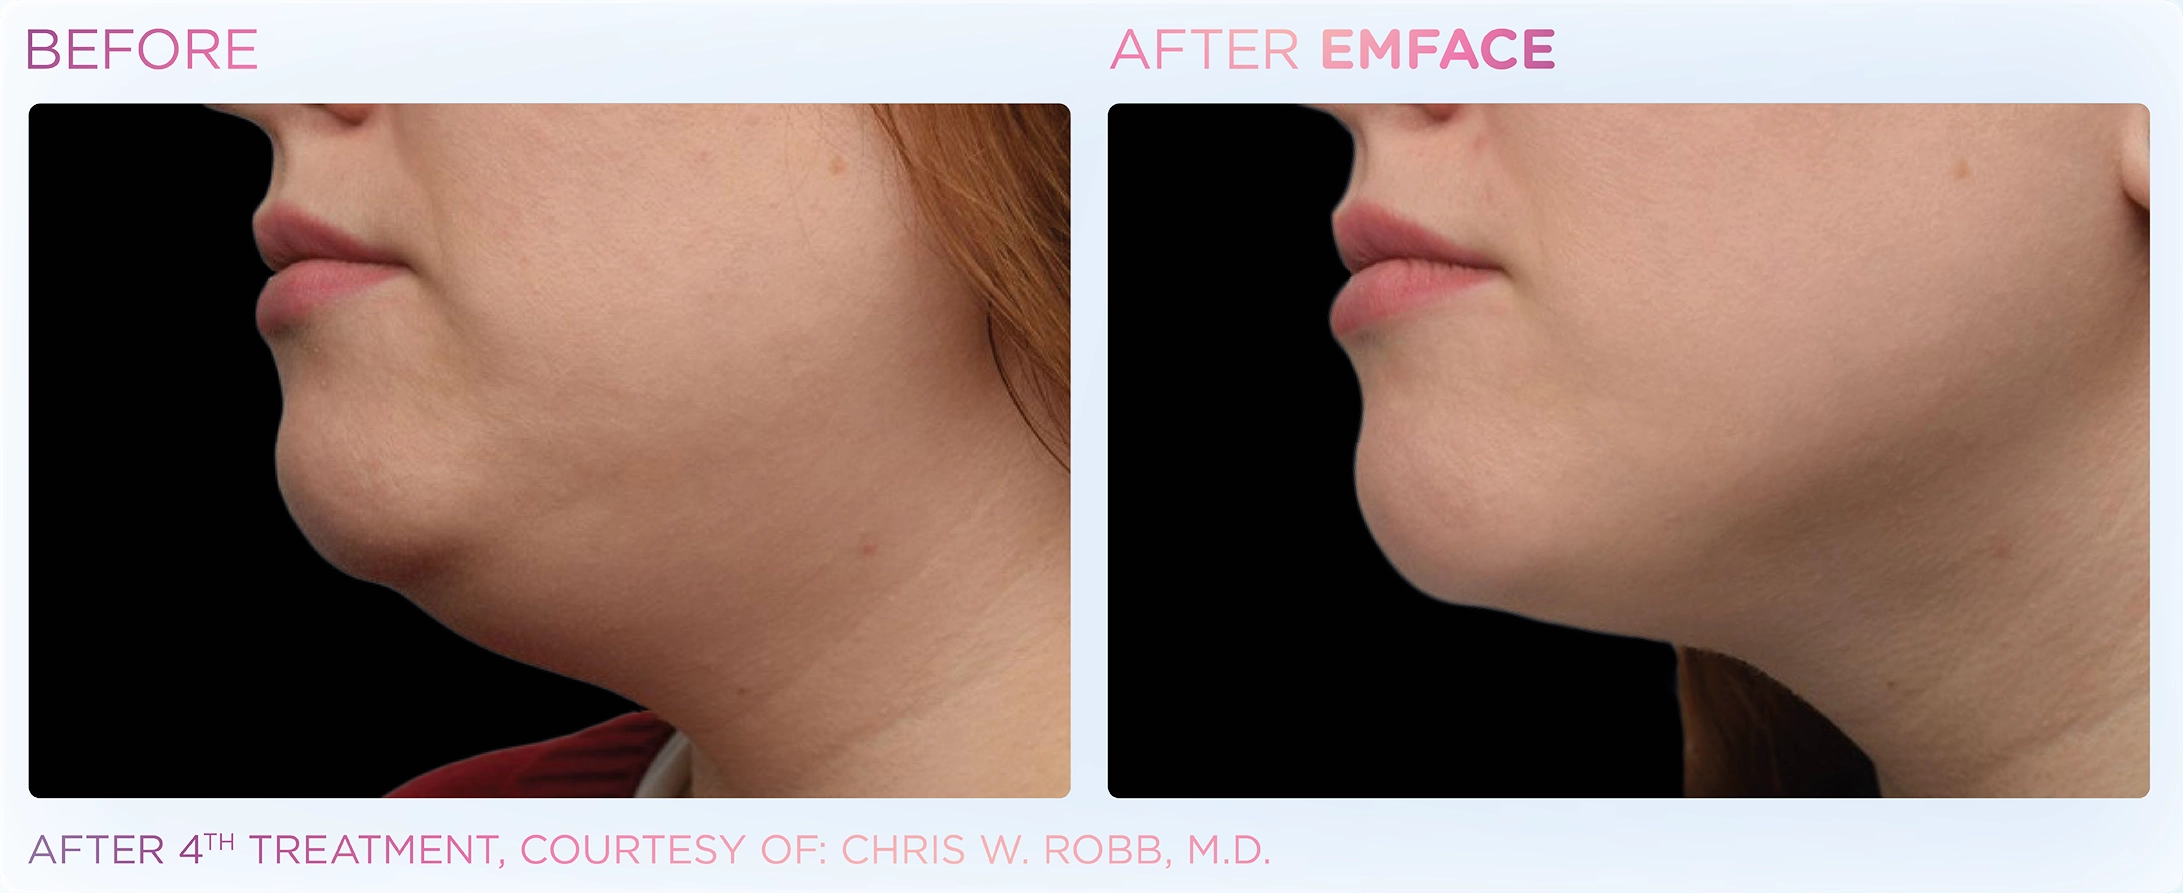 EMFACE Before & After | Image Gallery | Neo Body Med Spa